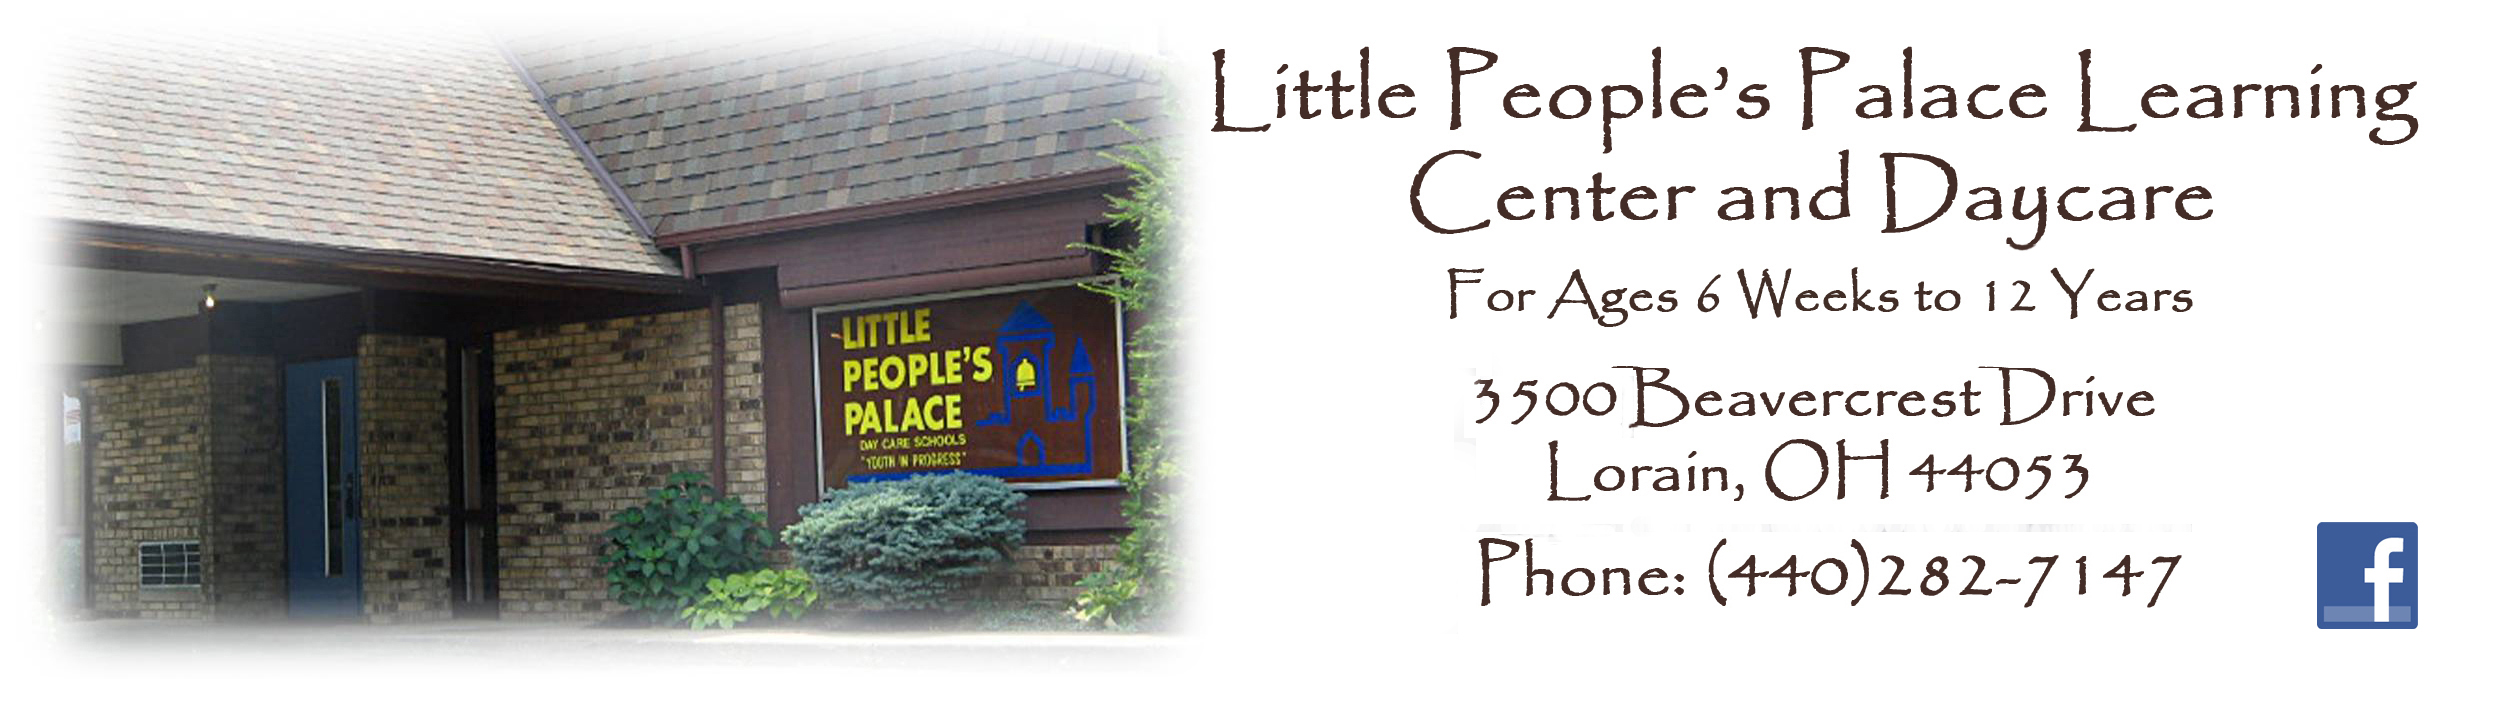 LITTLE PEOPLE'S PALACE